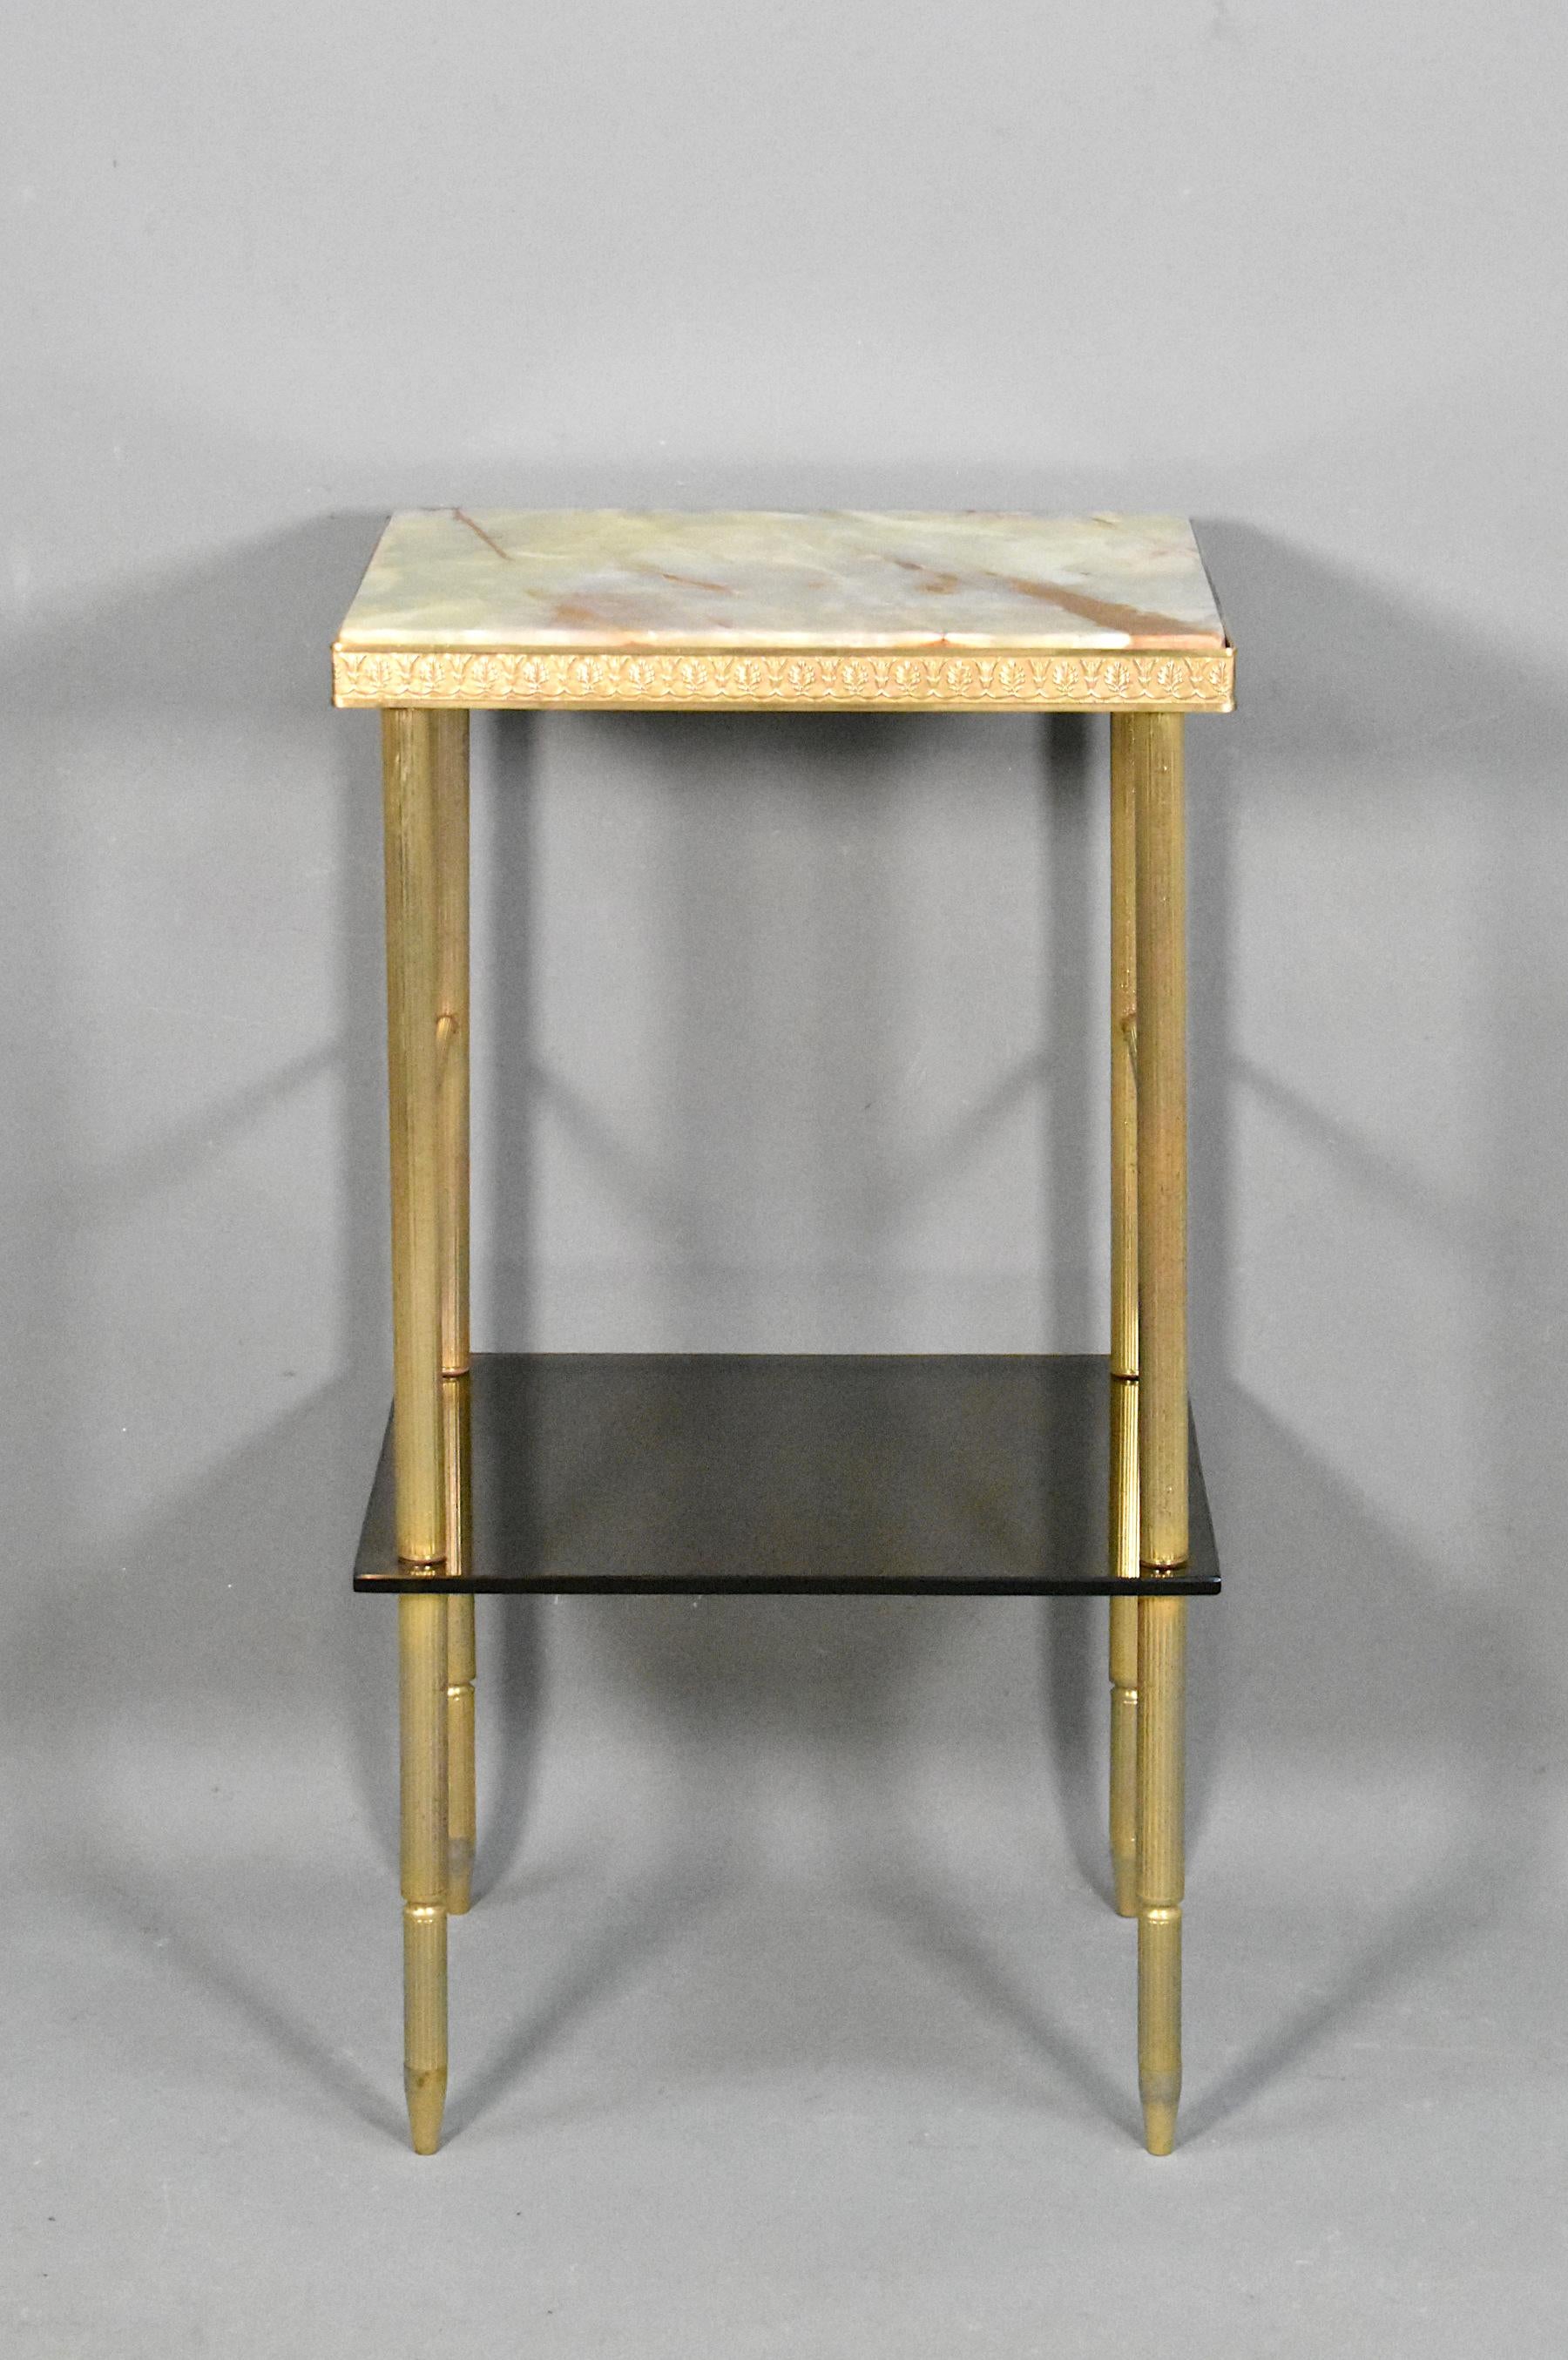 French mid century onyx and glass side table

A good example of quality craftsmanship is evident in the construction of this well-proportioned side table. 

Featuring an attractive onyx figured top, which is held in place by a floral decorated